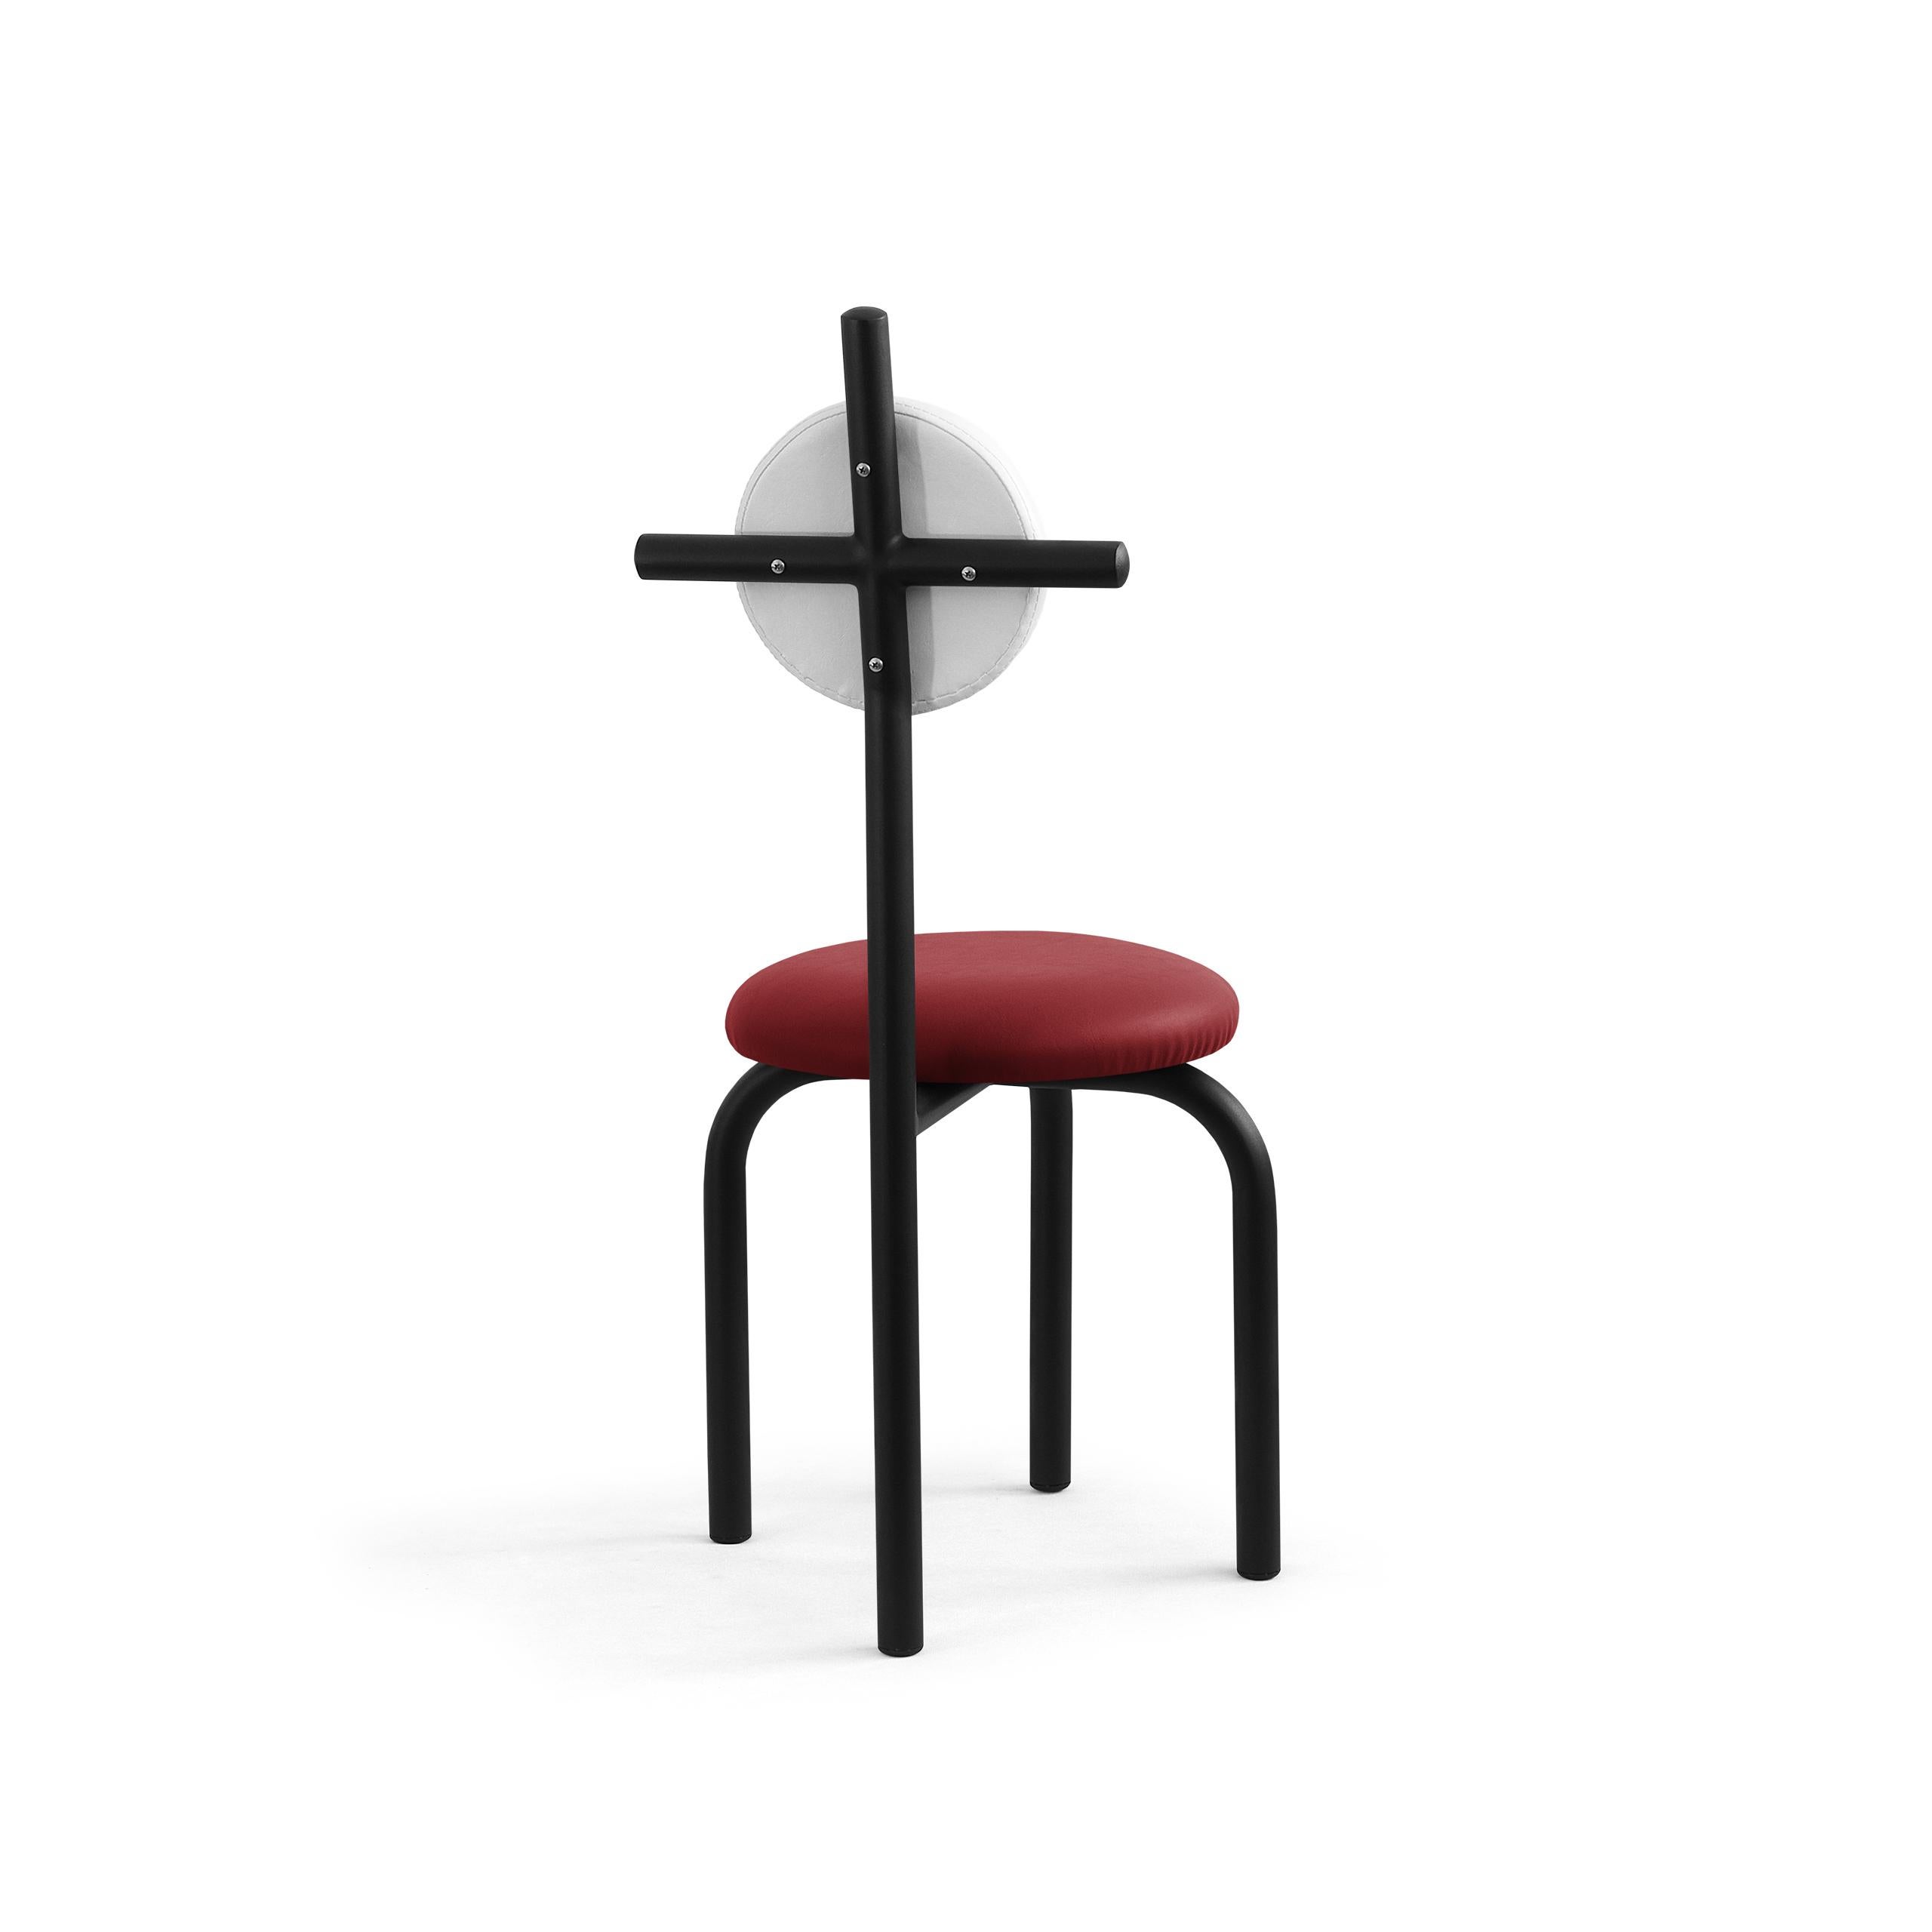 PK16 Impermeable Chair, Red Seat & Carbon Steel Structure by Paulo Kobylka In New Condition For Sale In Londrina, Paraná